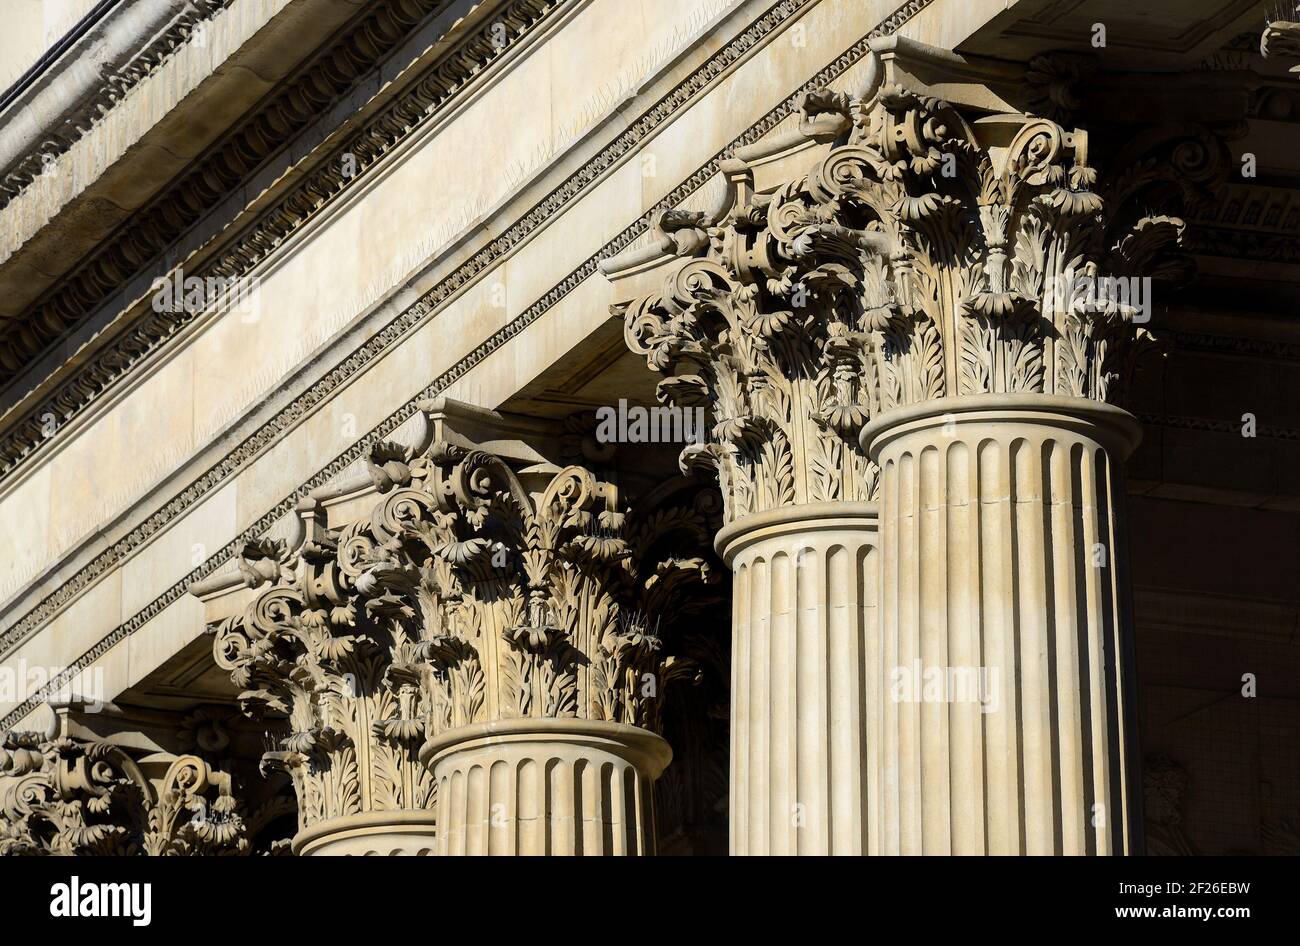 London, England, UK. St Paul's Cathedral. Corinthian columns (paired) on the western facade Stock Photo